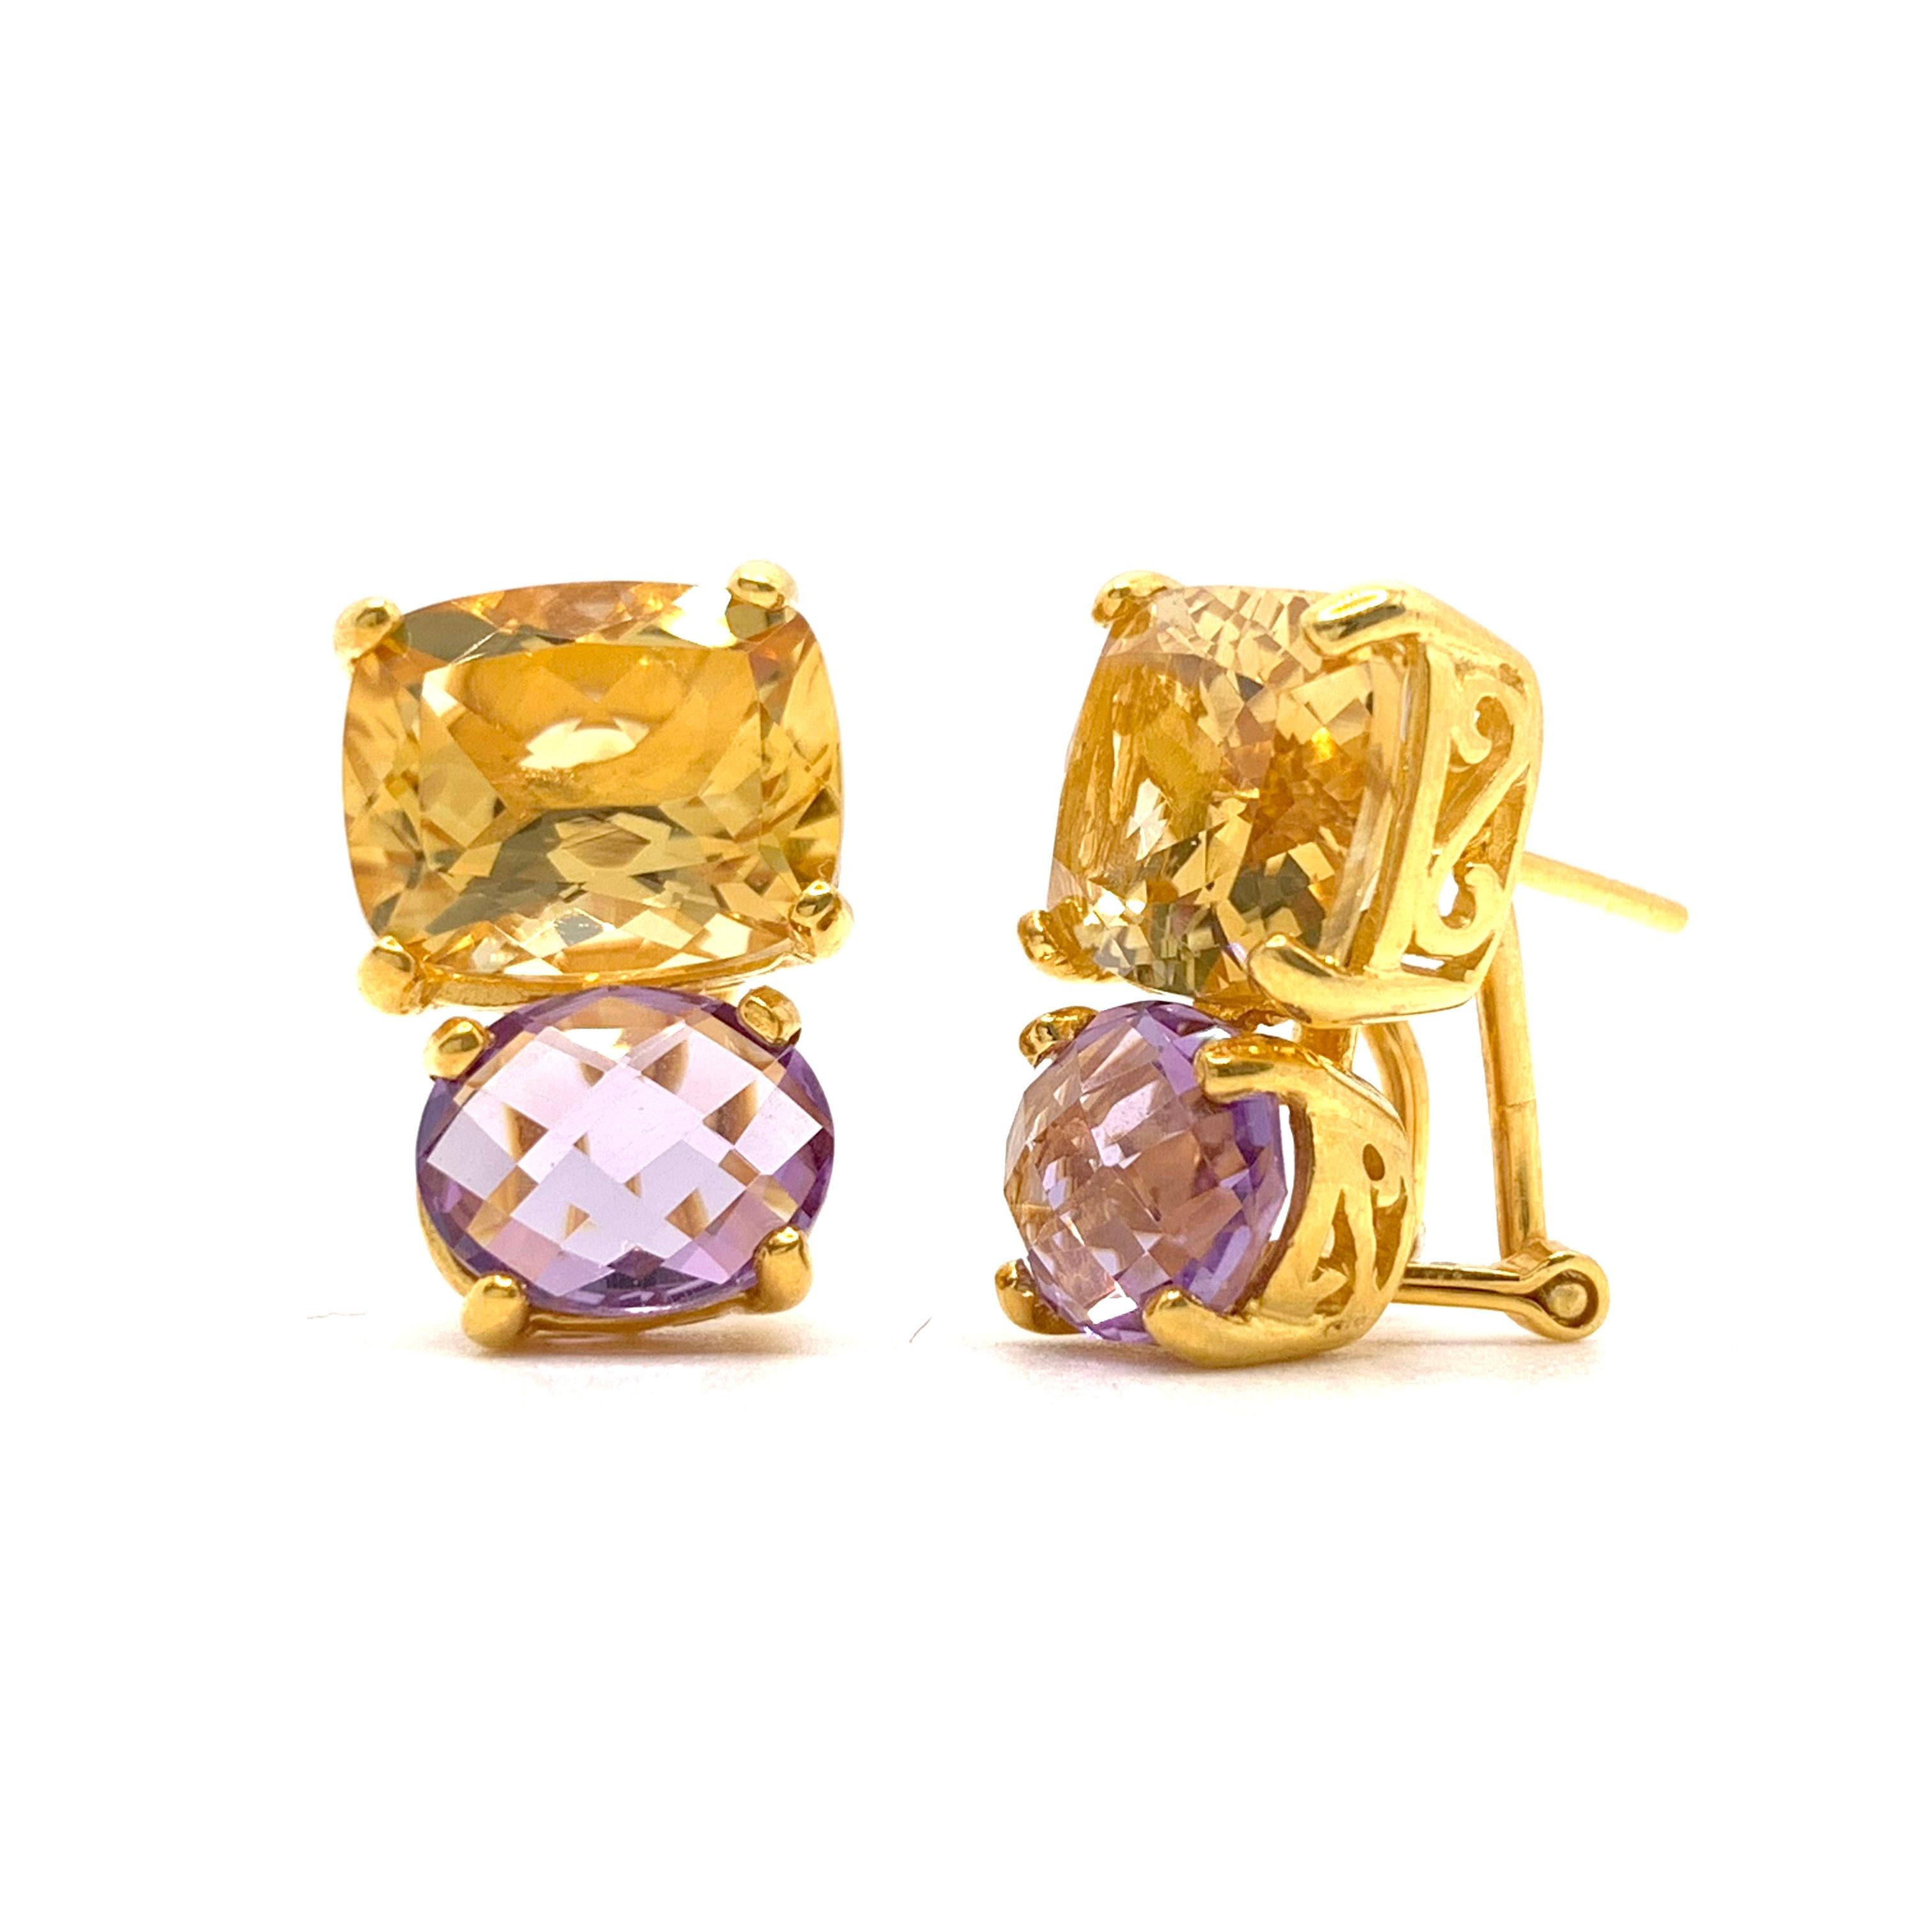 Bijoux Num Cushion-cut Citrine and Oval Amethyst Vermeil Earrings

These stunning pair of earrings features a pair of genuine cushion-cut Brazilian citrine with oval briolette-cut amethyst, handset in 18k yellow gold vermeil over sterling silver.